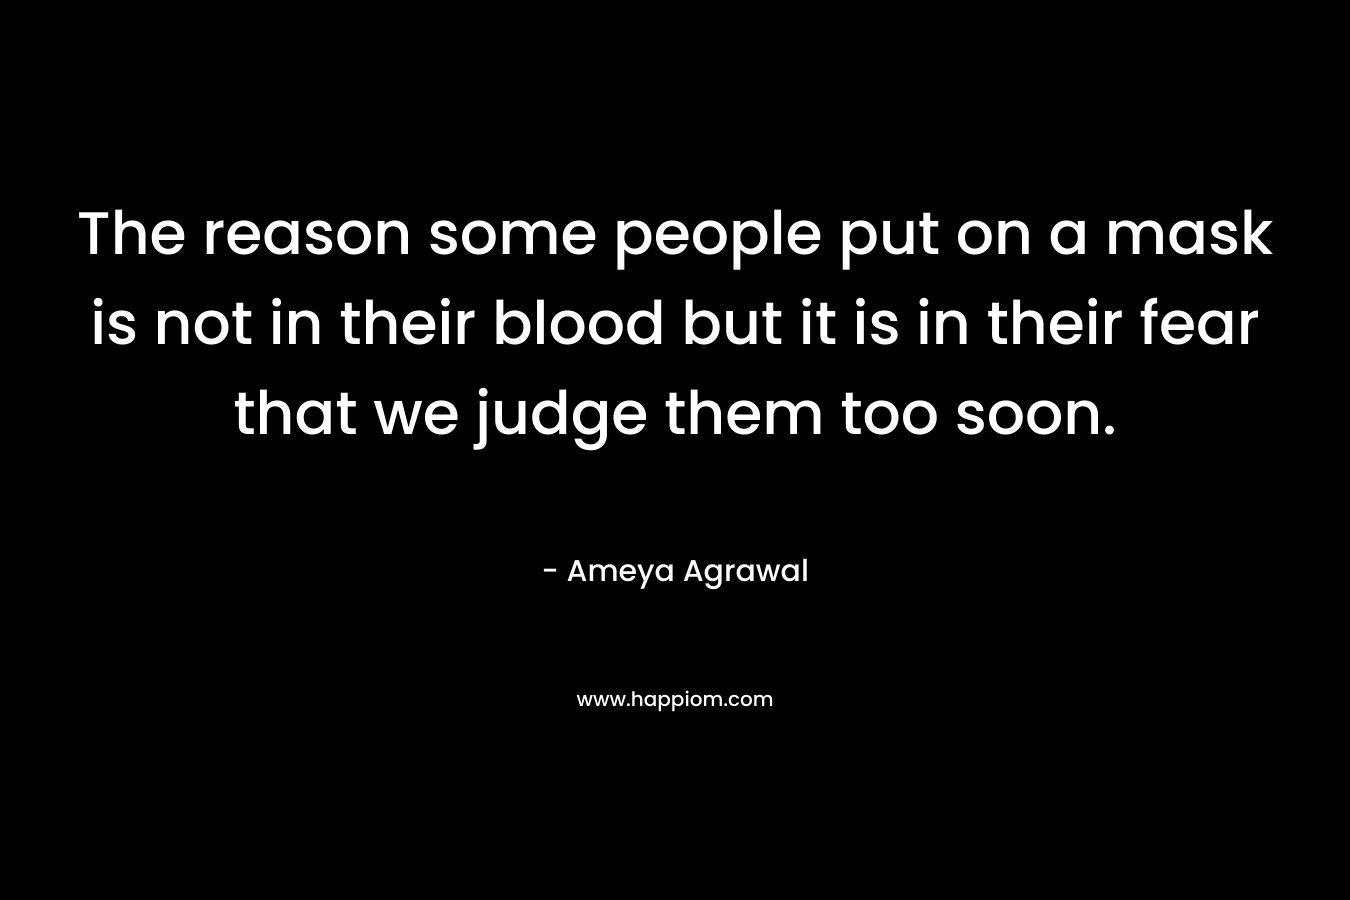 The reason some people put on a mask is not in their blood but it is in their fear that we judge them too soon. – Ameya Agrawal